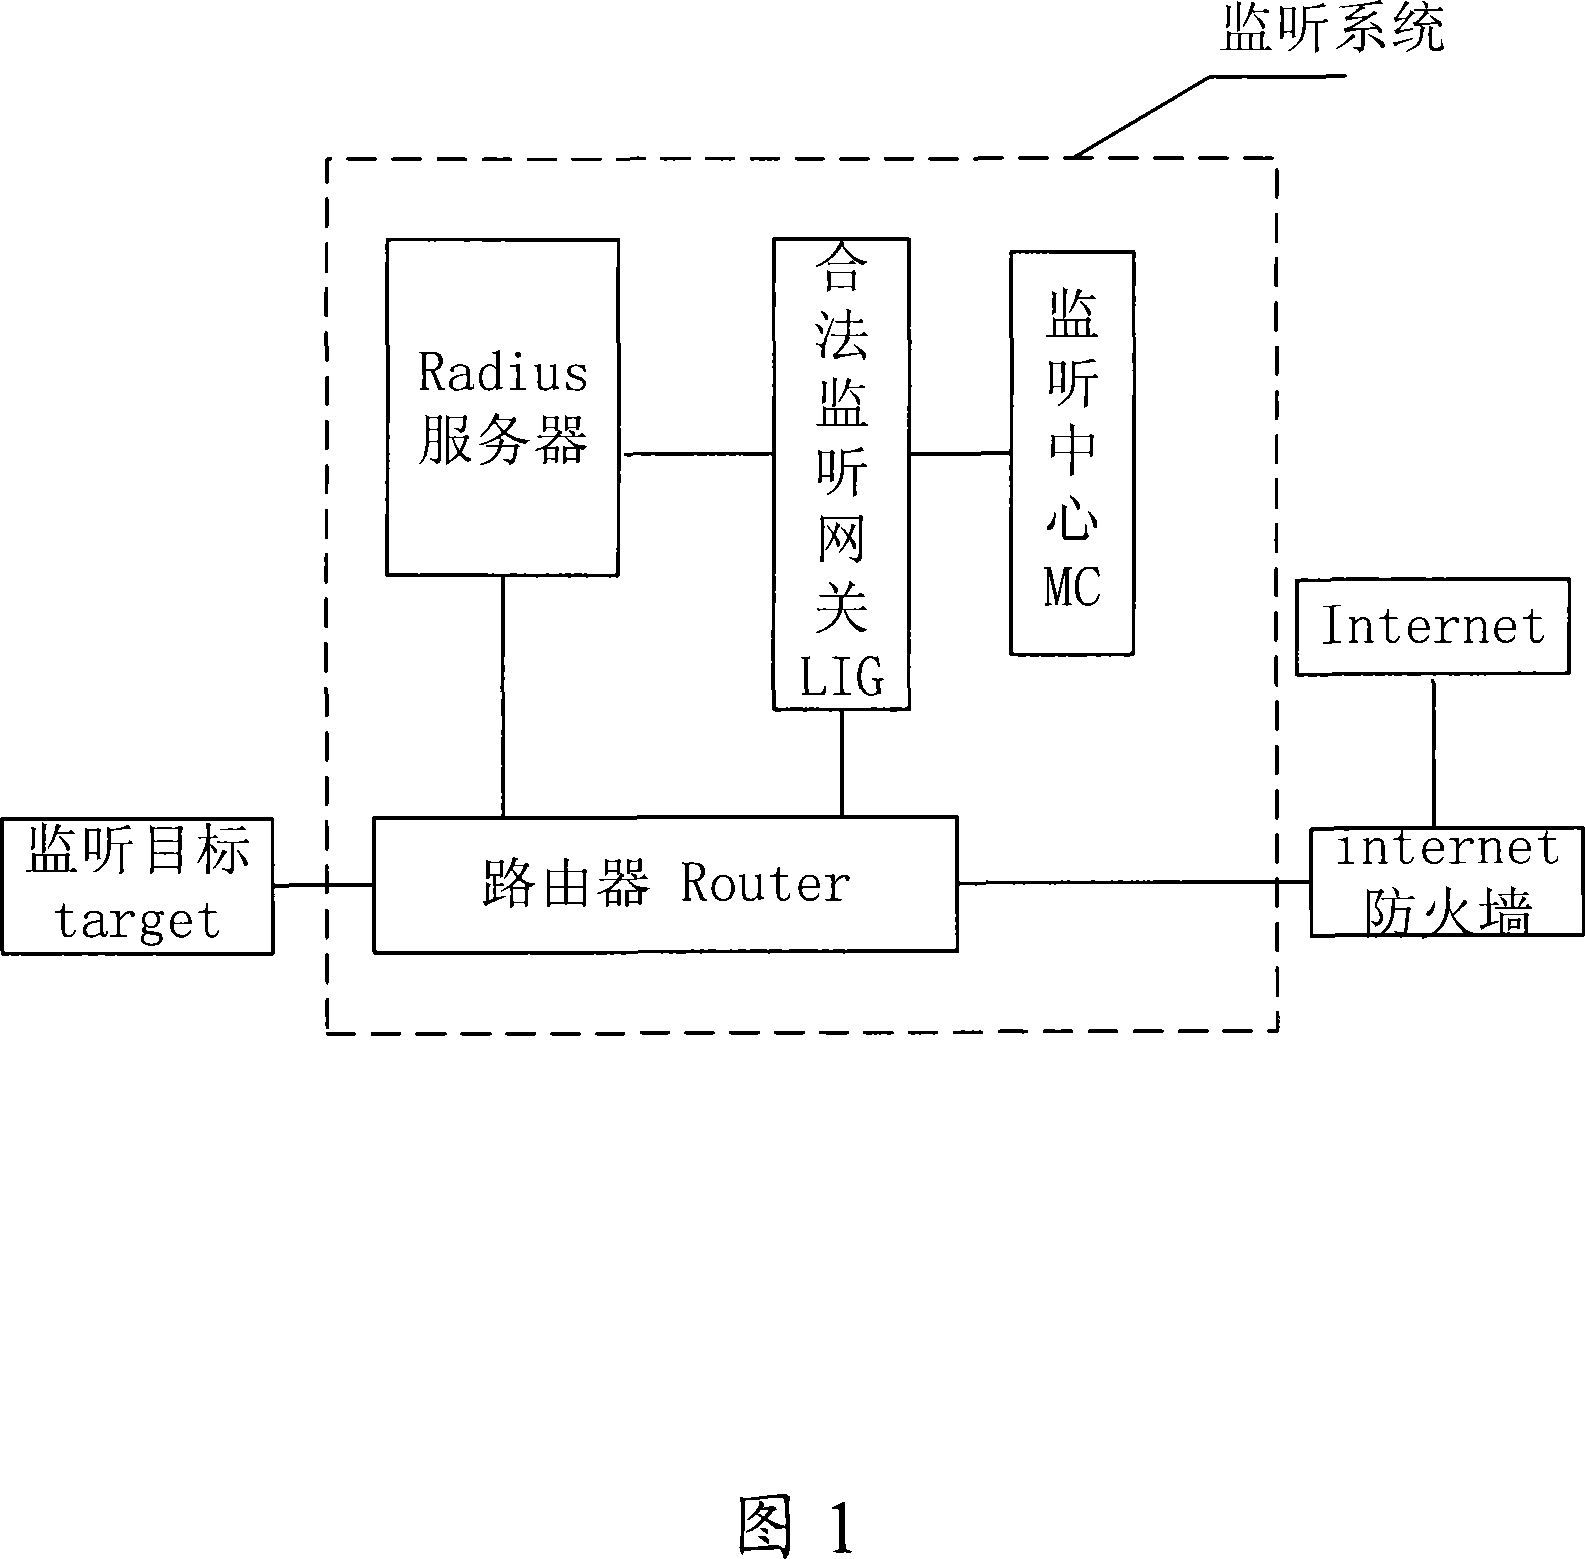 Monitoring system, apparatus and method in IP network